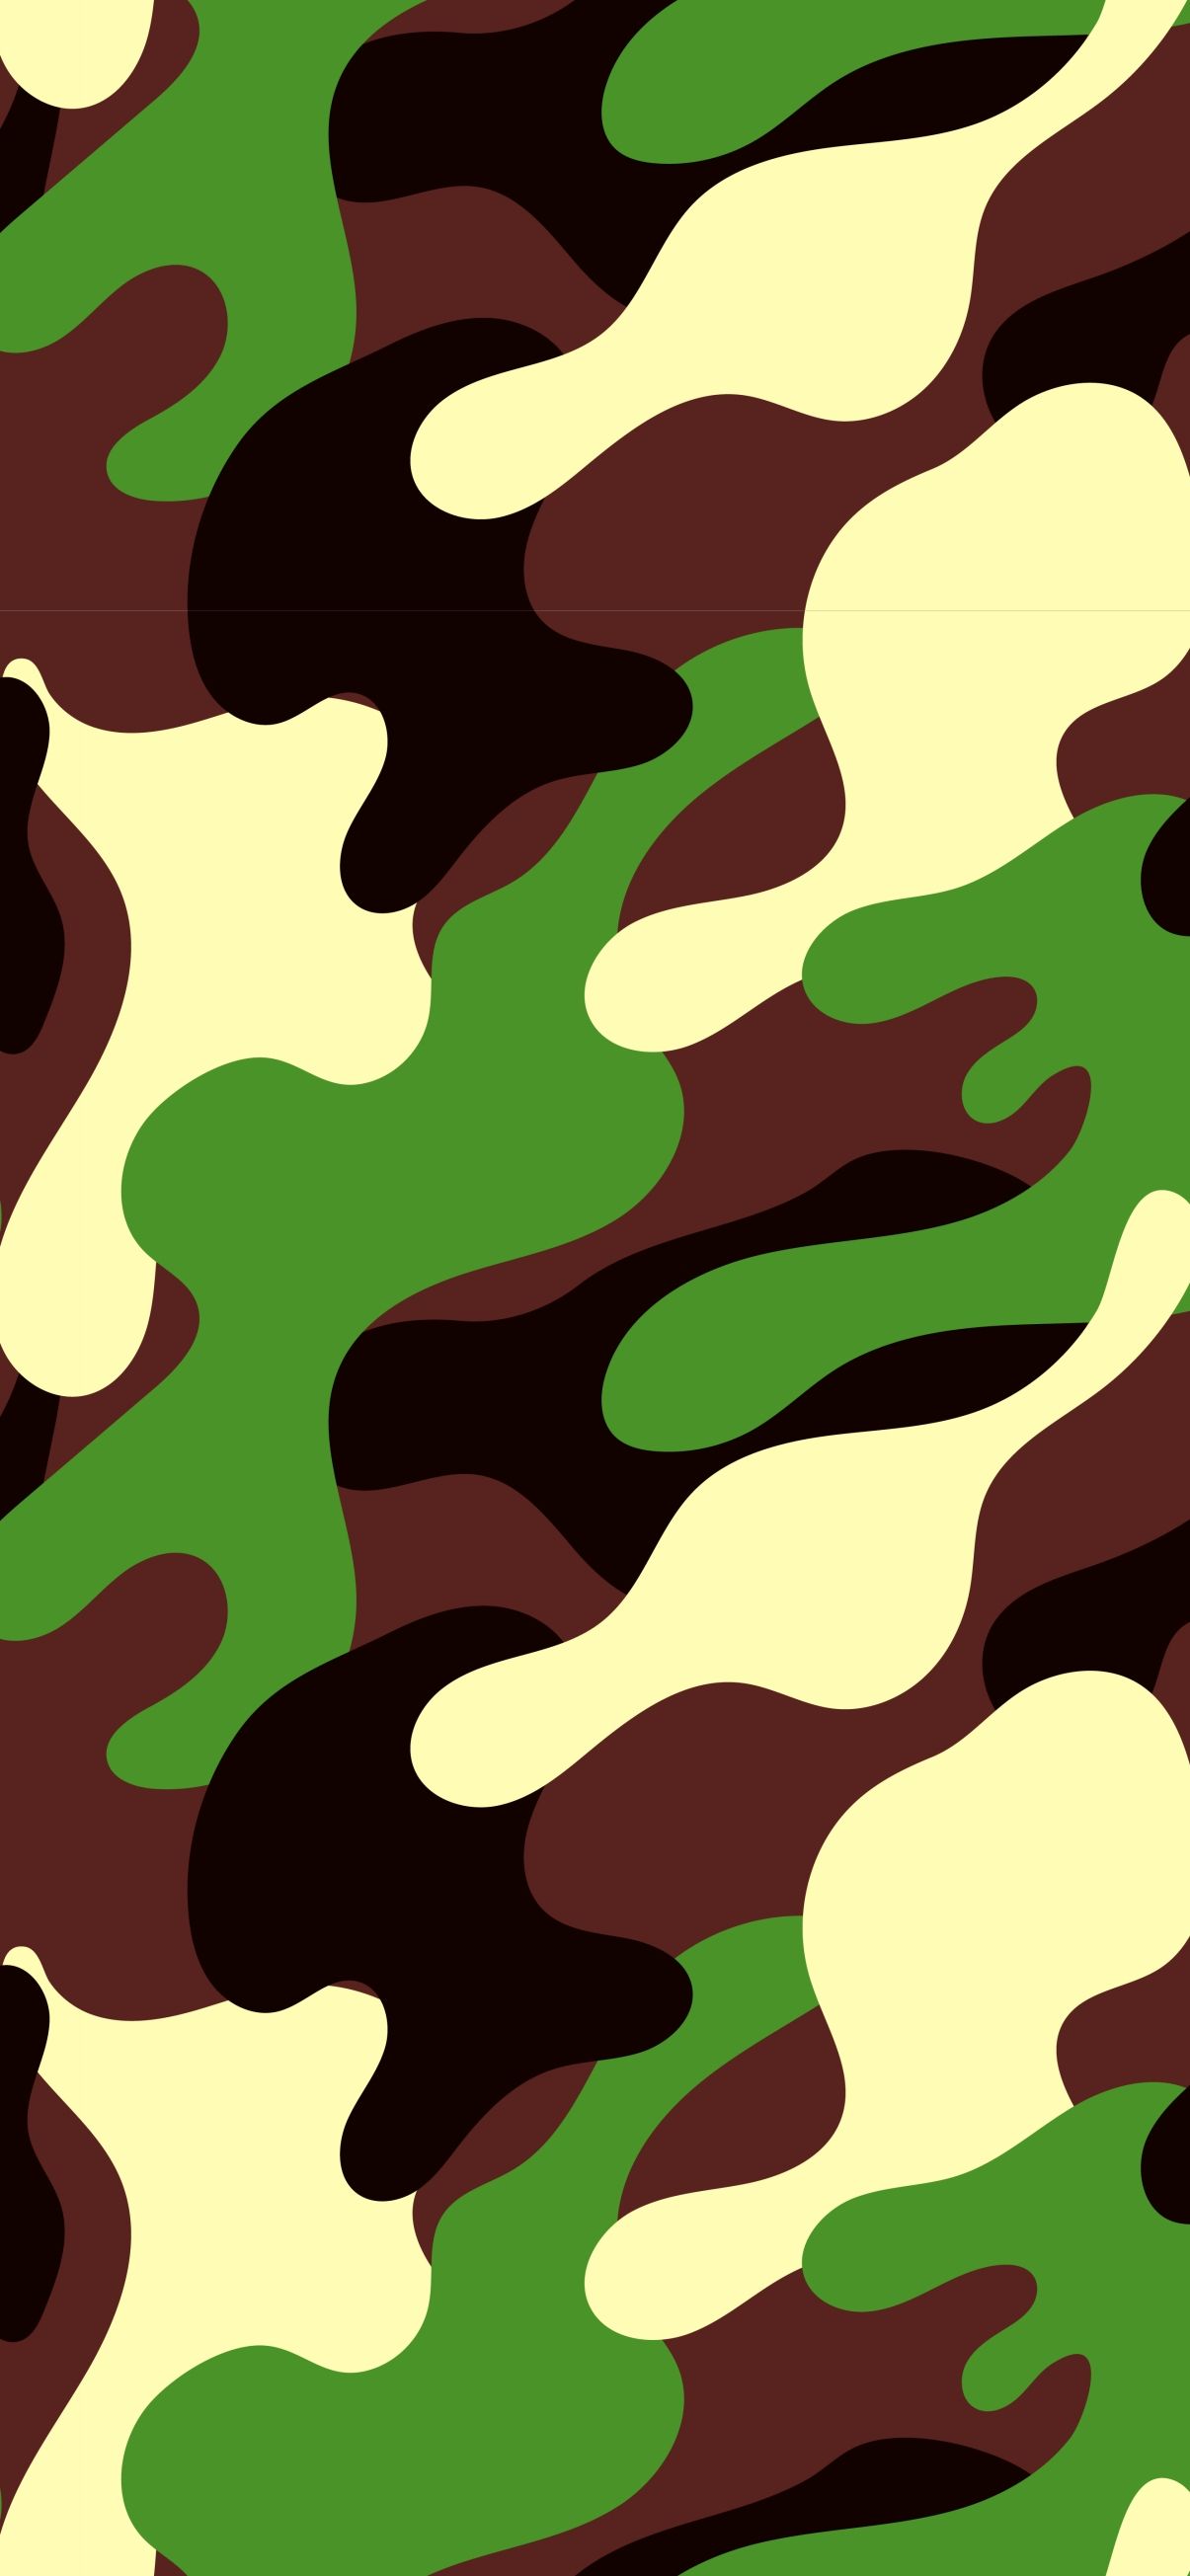 camouflage phone wallpaper in HD. Background Wallpaper